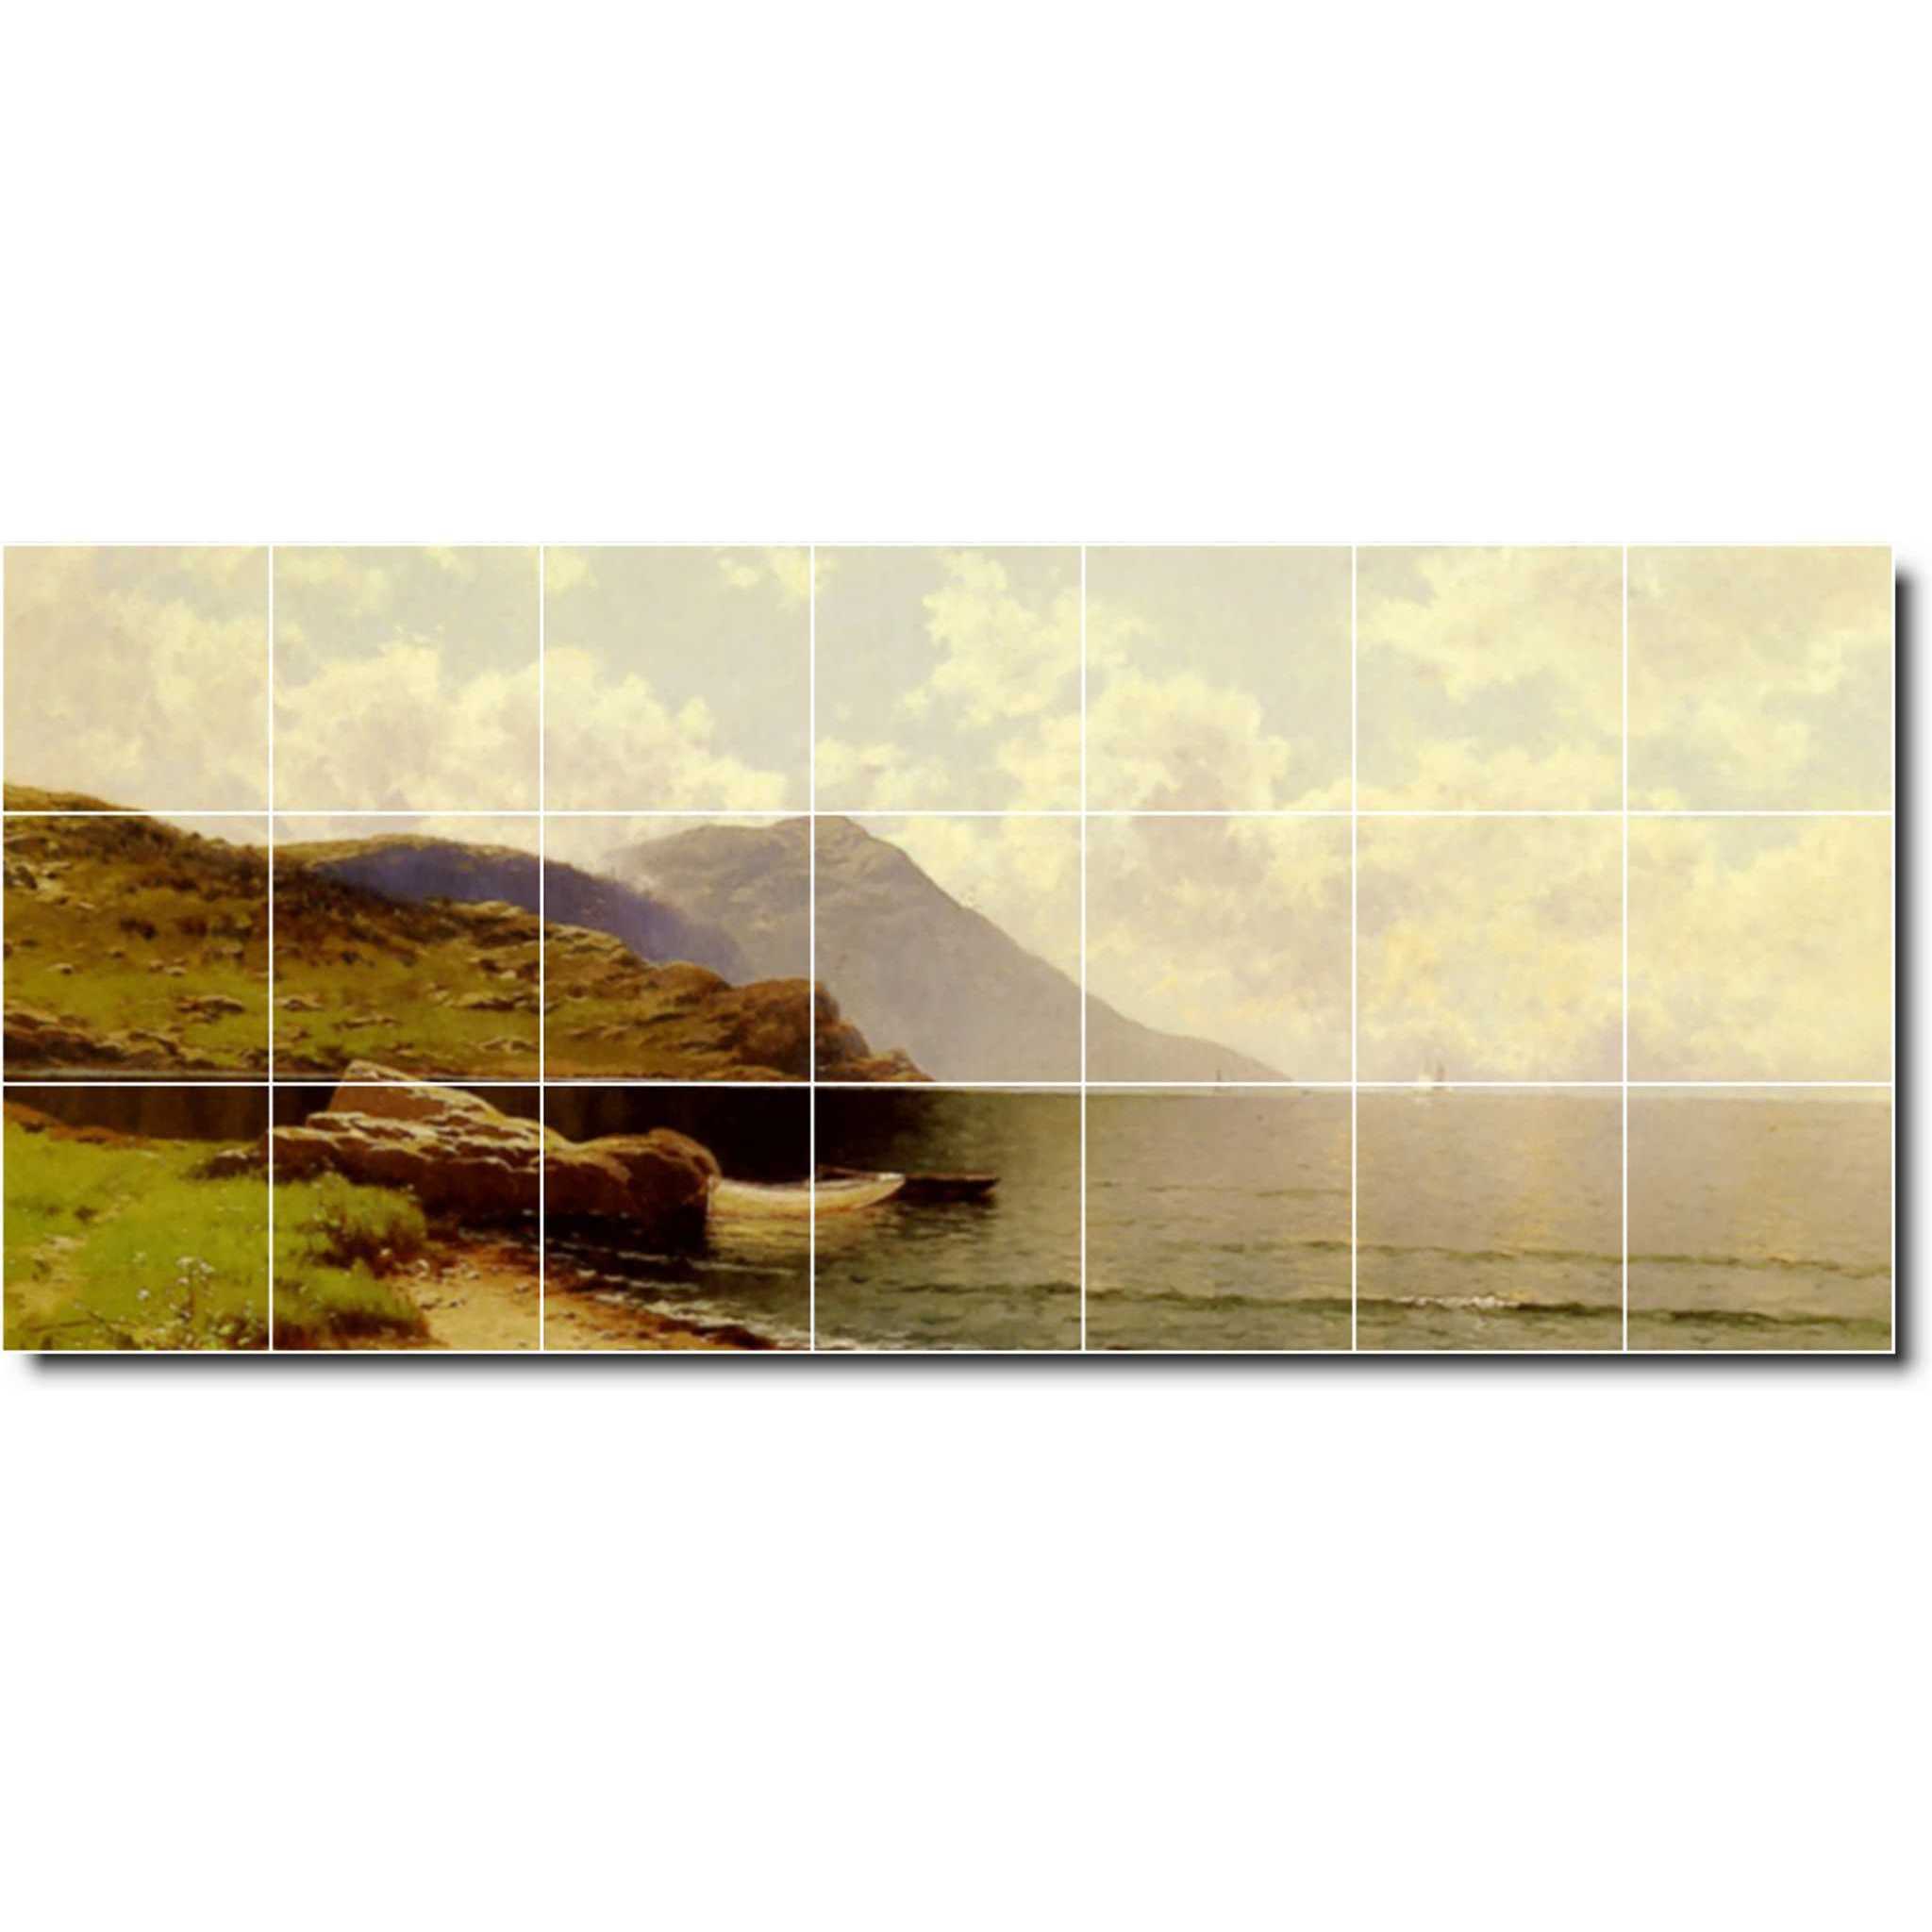 alfred bricher waterfront painting ceramic tile mural p01056